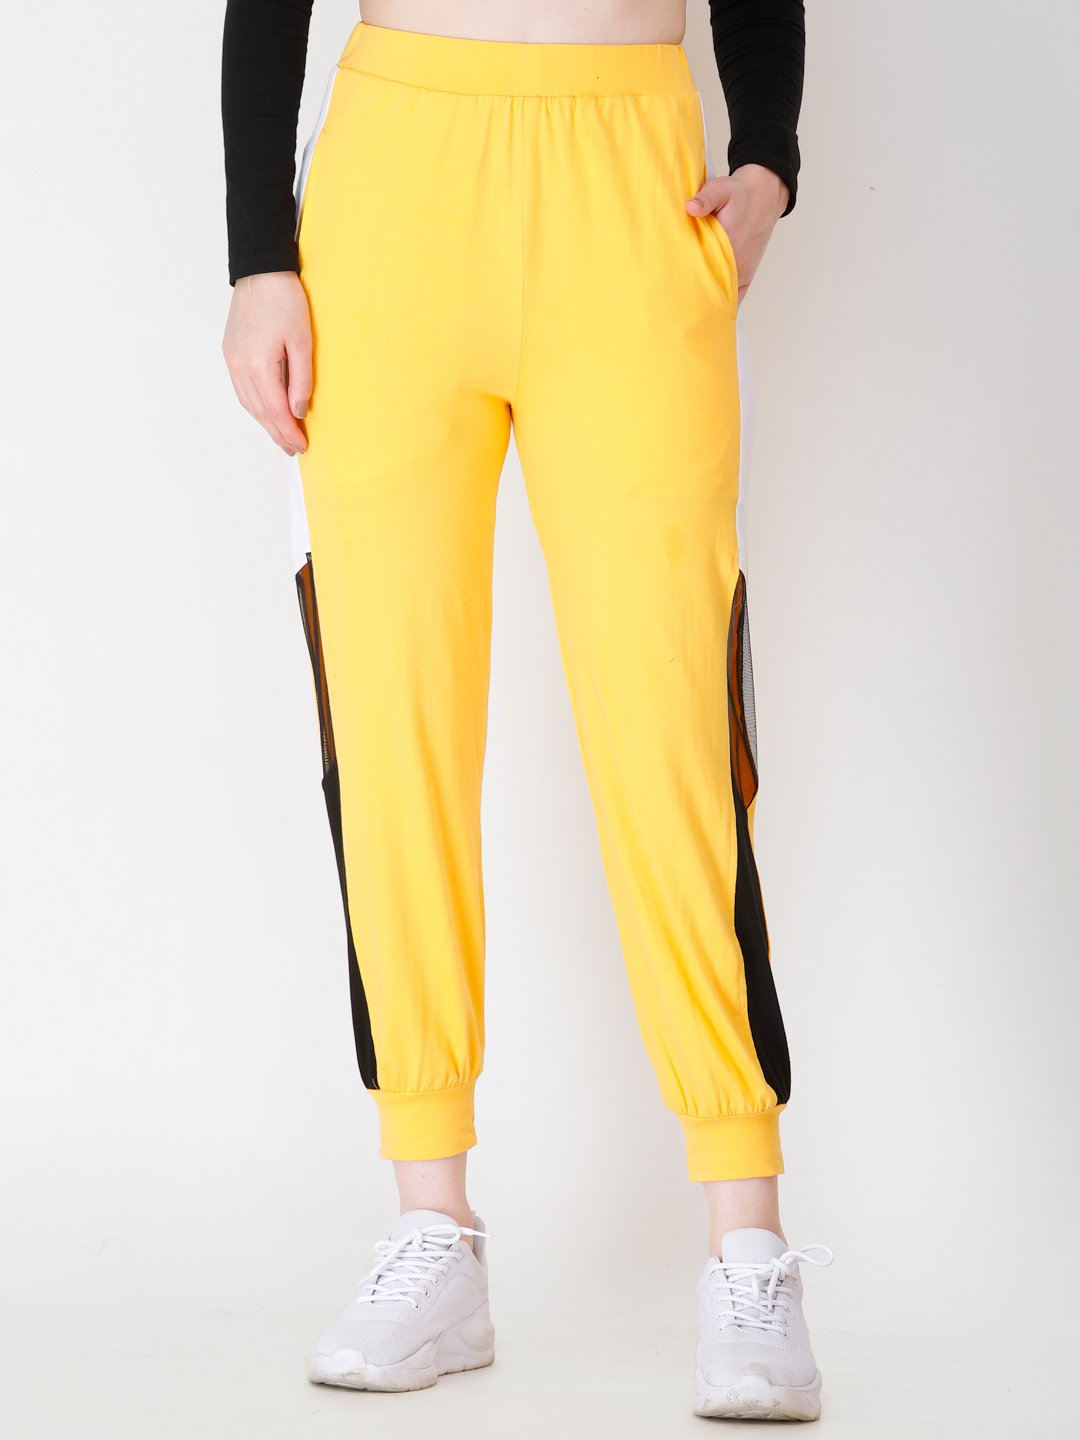 SCORPIUS YELLOW SIDE STRAP TRACK PANT